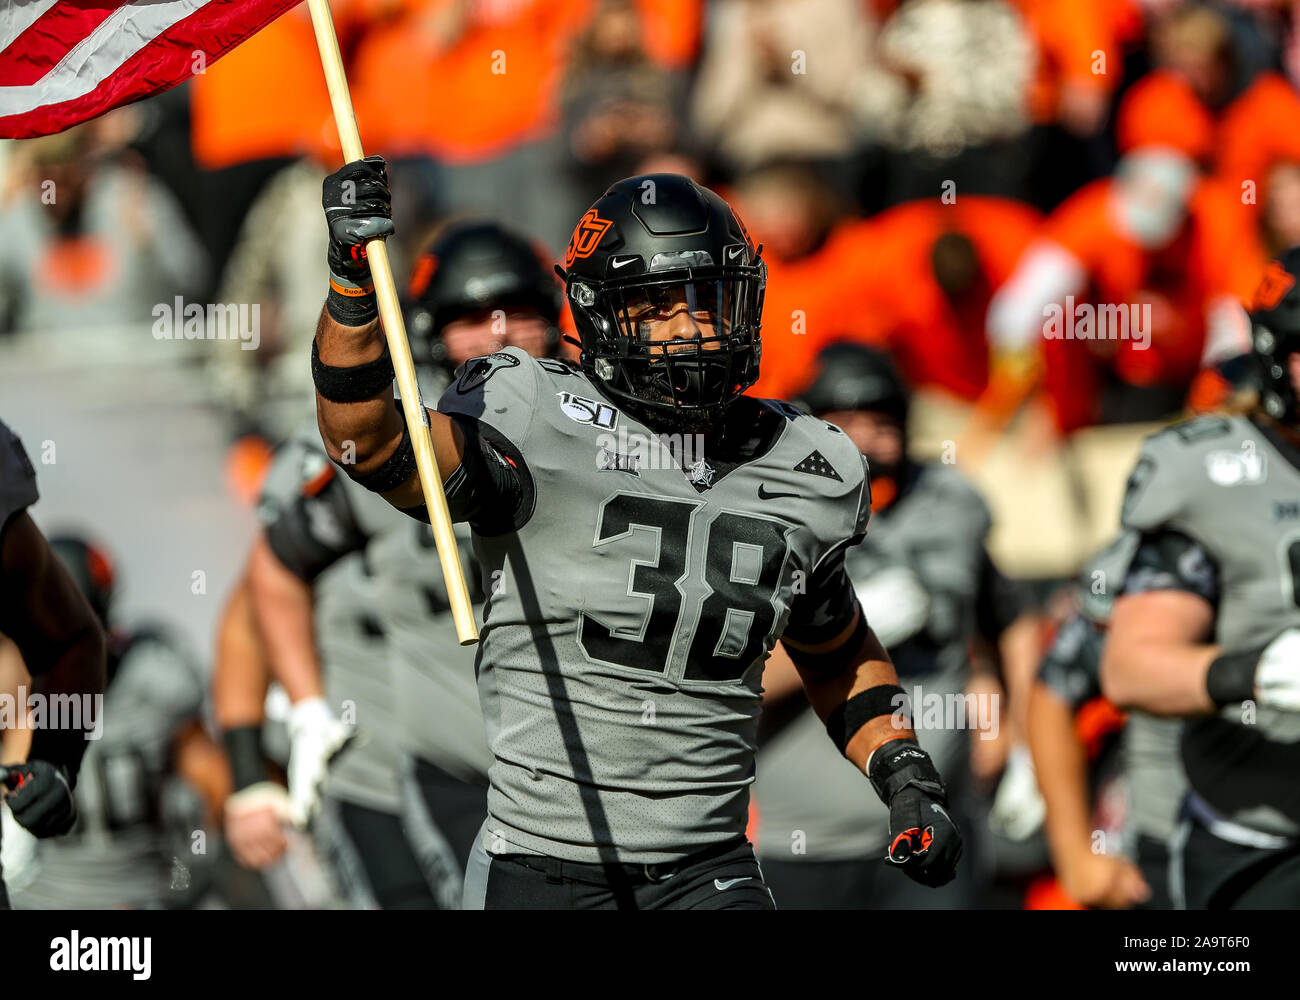 Stillwater, OK, USA. 16th Nov, 2019. Oklahoma State linebacker Philip Redwine-Bryant (38) takes the field during a football game between the University of Kansas Jayhawks and the Oklahoma State Cowboys at Boone Pickens Stadium in Stillwater, OK. Gray Siegel/CSM/Alamy Live News Stock Photo